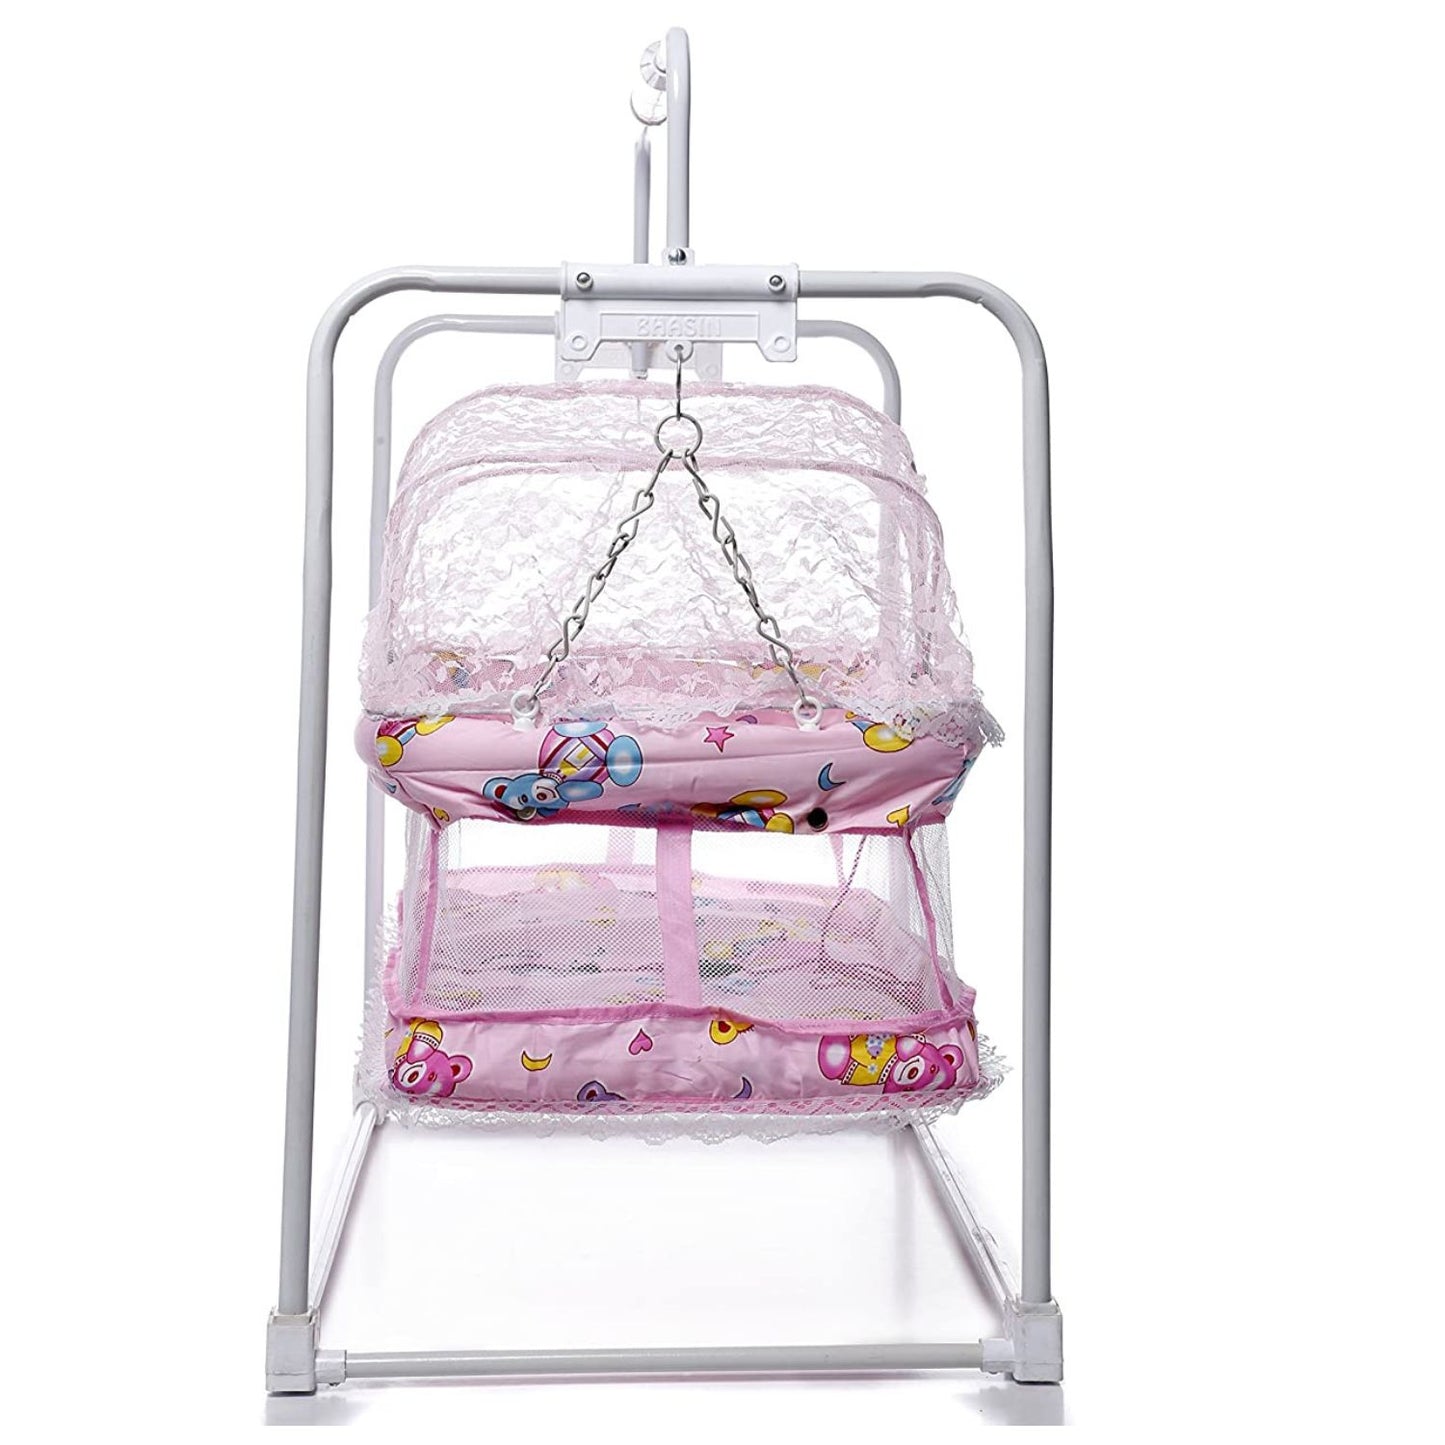 Bhasin Mobile Swing Compact Cradle Jhulla With Mosquito Net , Safe Confirtable And Deep For 0+ Month Baby